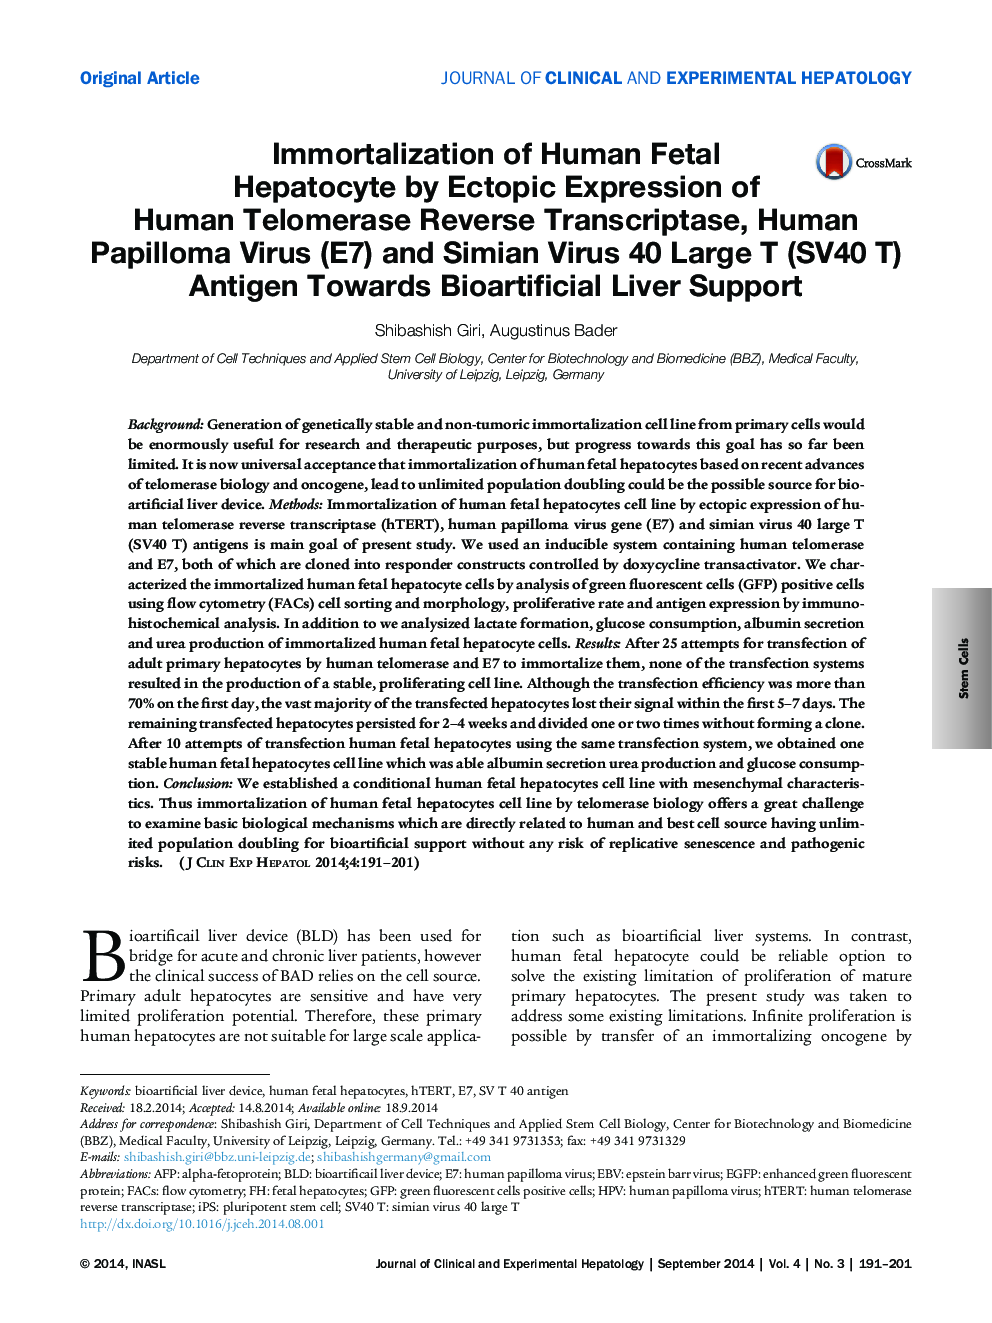 Immortalization of Human Fetal Hepatocyte by Ectopic Expression of Human Telomerase Reverse Transcriptase, Human Papilloma Virus (E7) and Simian Virus 40 Large T (SV40 T) Antigen Towards Bioartificial Liver Support